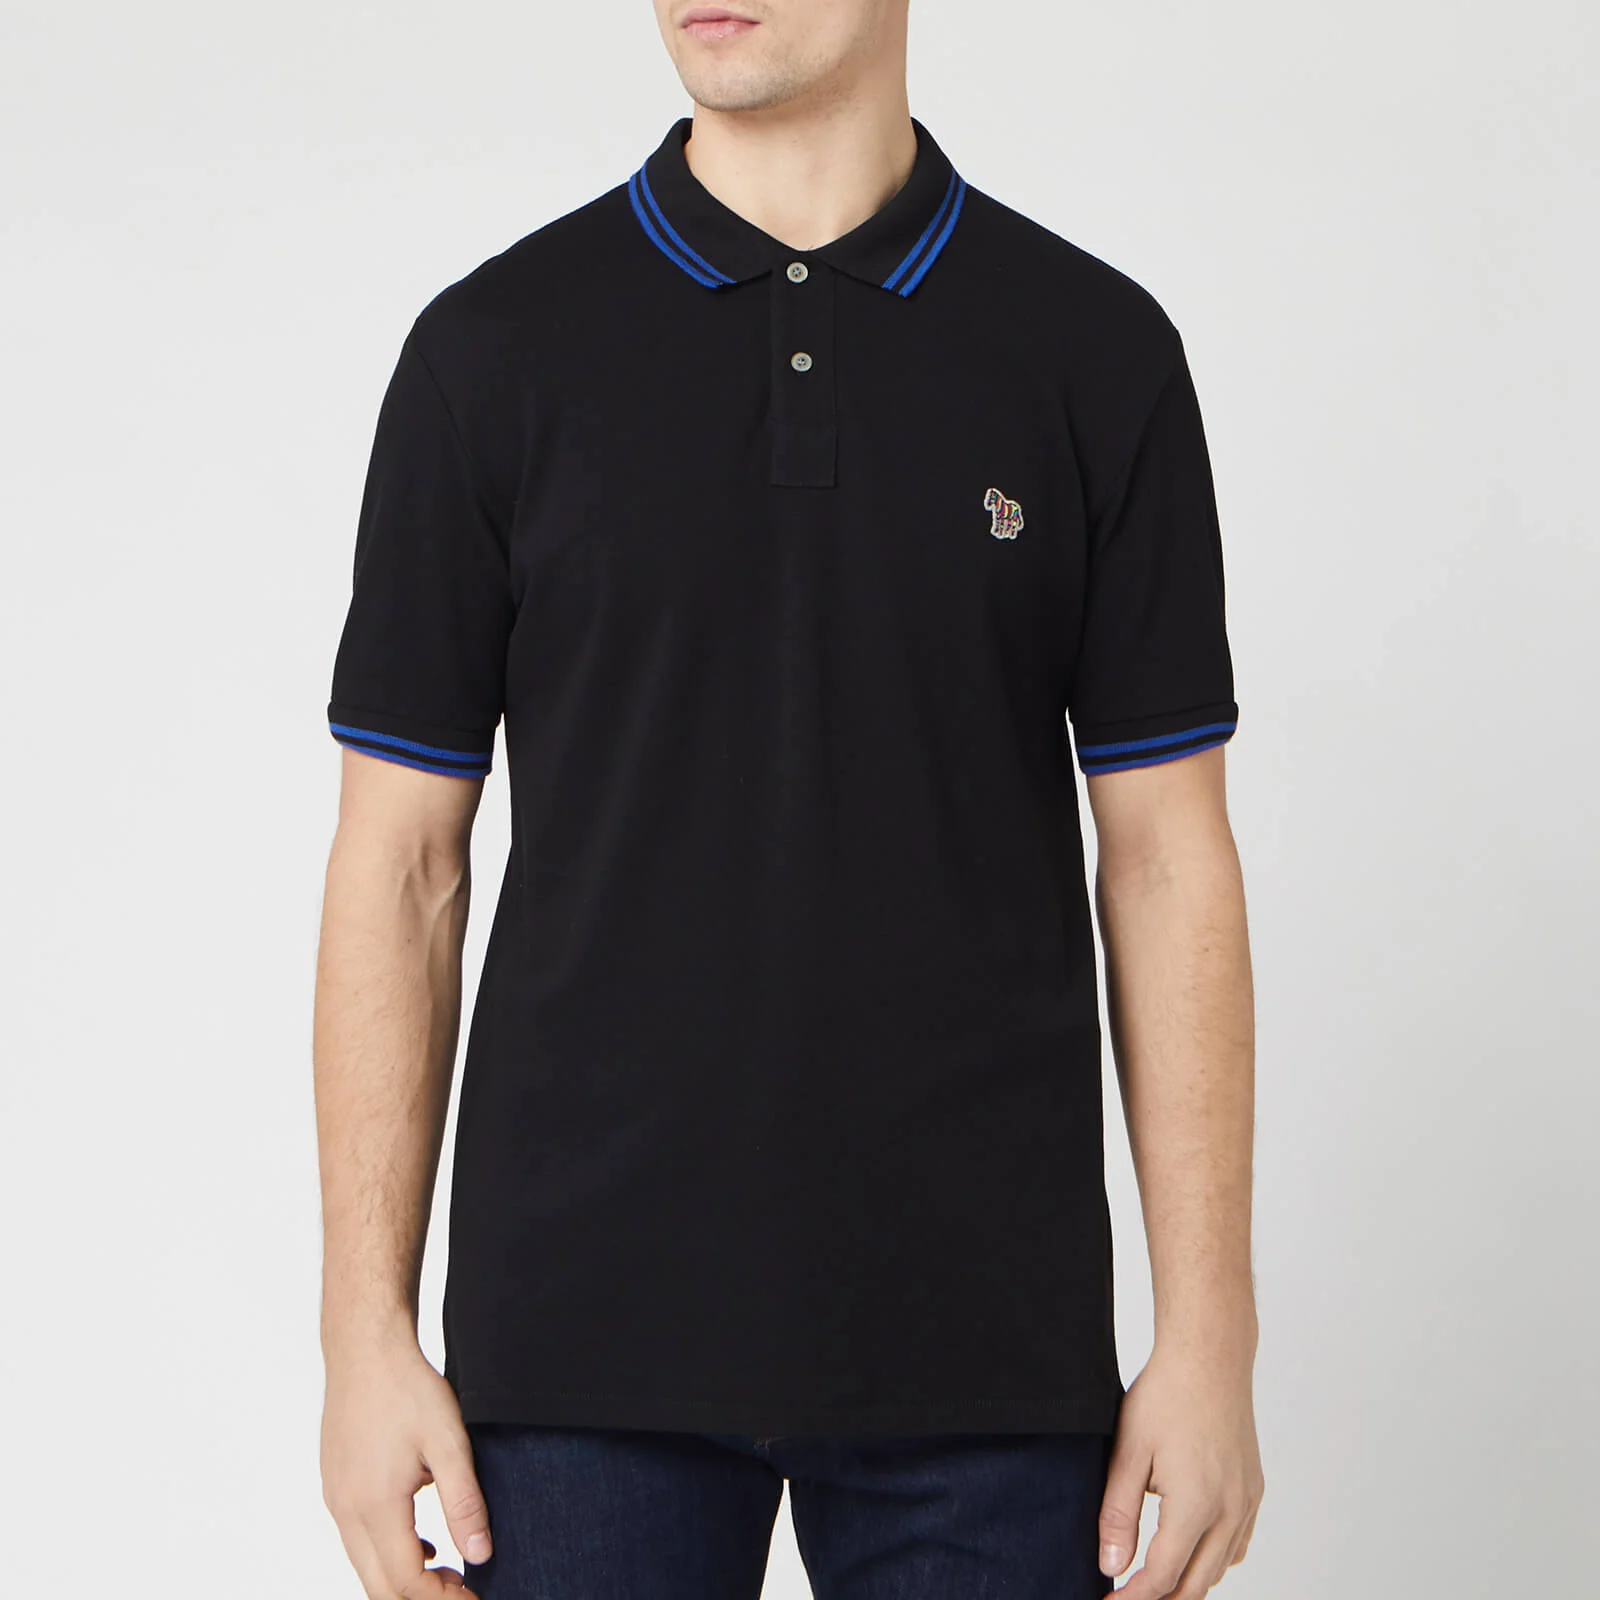 PS Paul Smith Men's Regular Fit Tipped Polo Shirt - Black Image 1